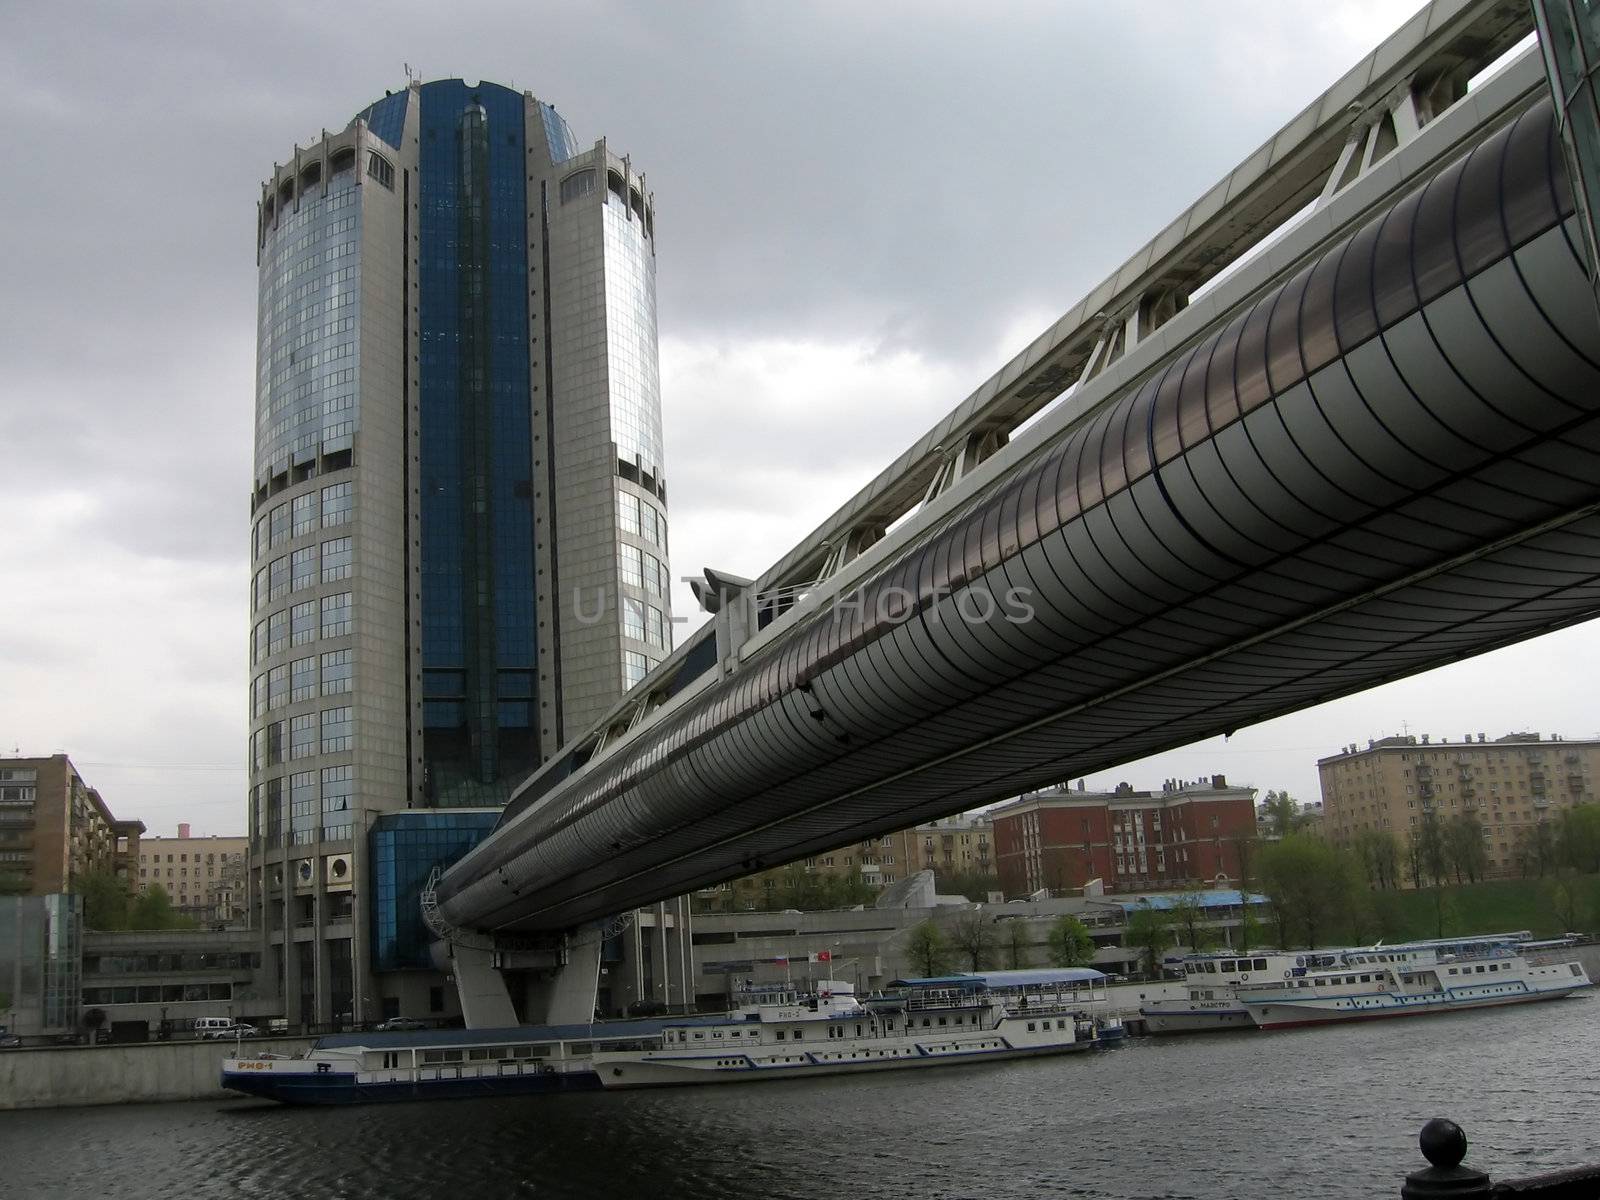 The bridge named Bagration is under Moscow river